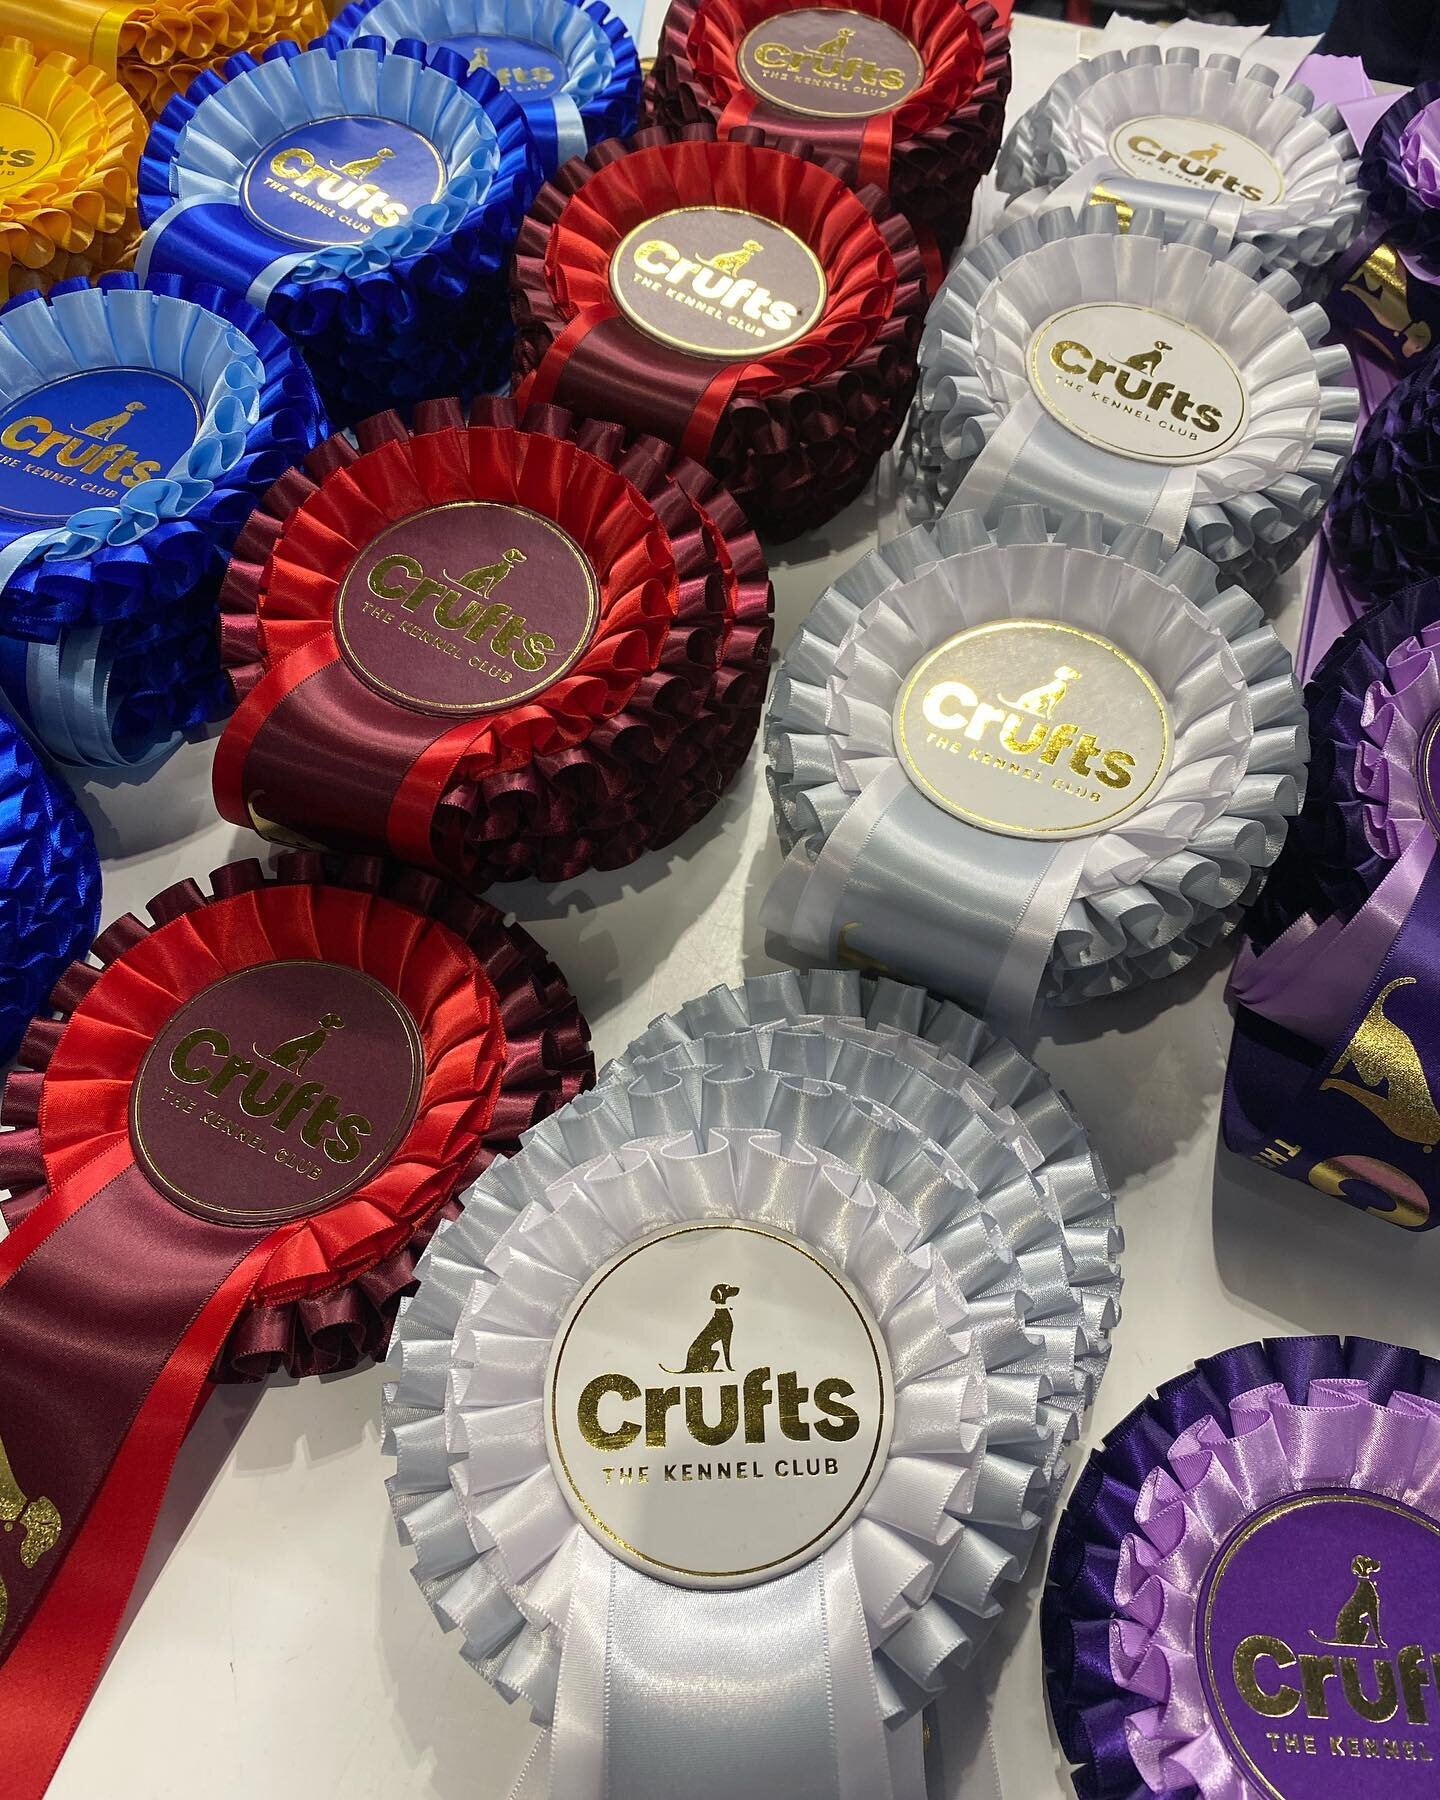 Had so much fun last year, I&rsquo;ve come back for more! 🐾 
Follow the Arena action live all day on the @crufts YouTube channel, with even more features and highlights with @clarebalding and our team every afternoon &amp; evening on @channel4 throu